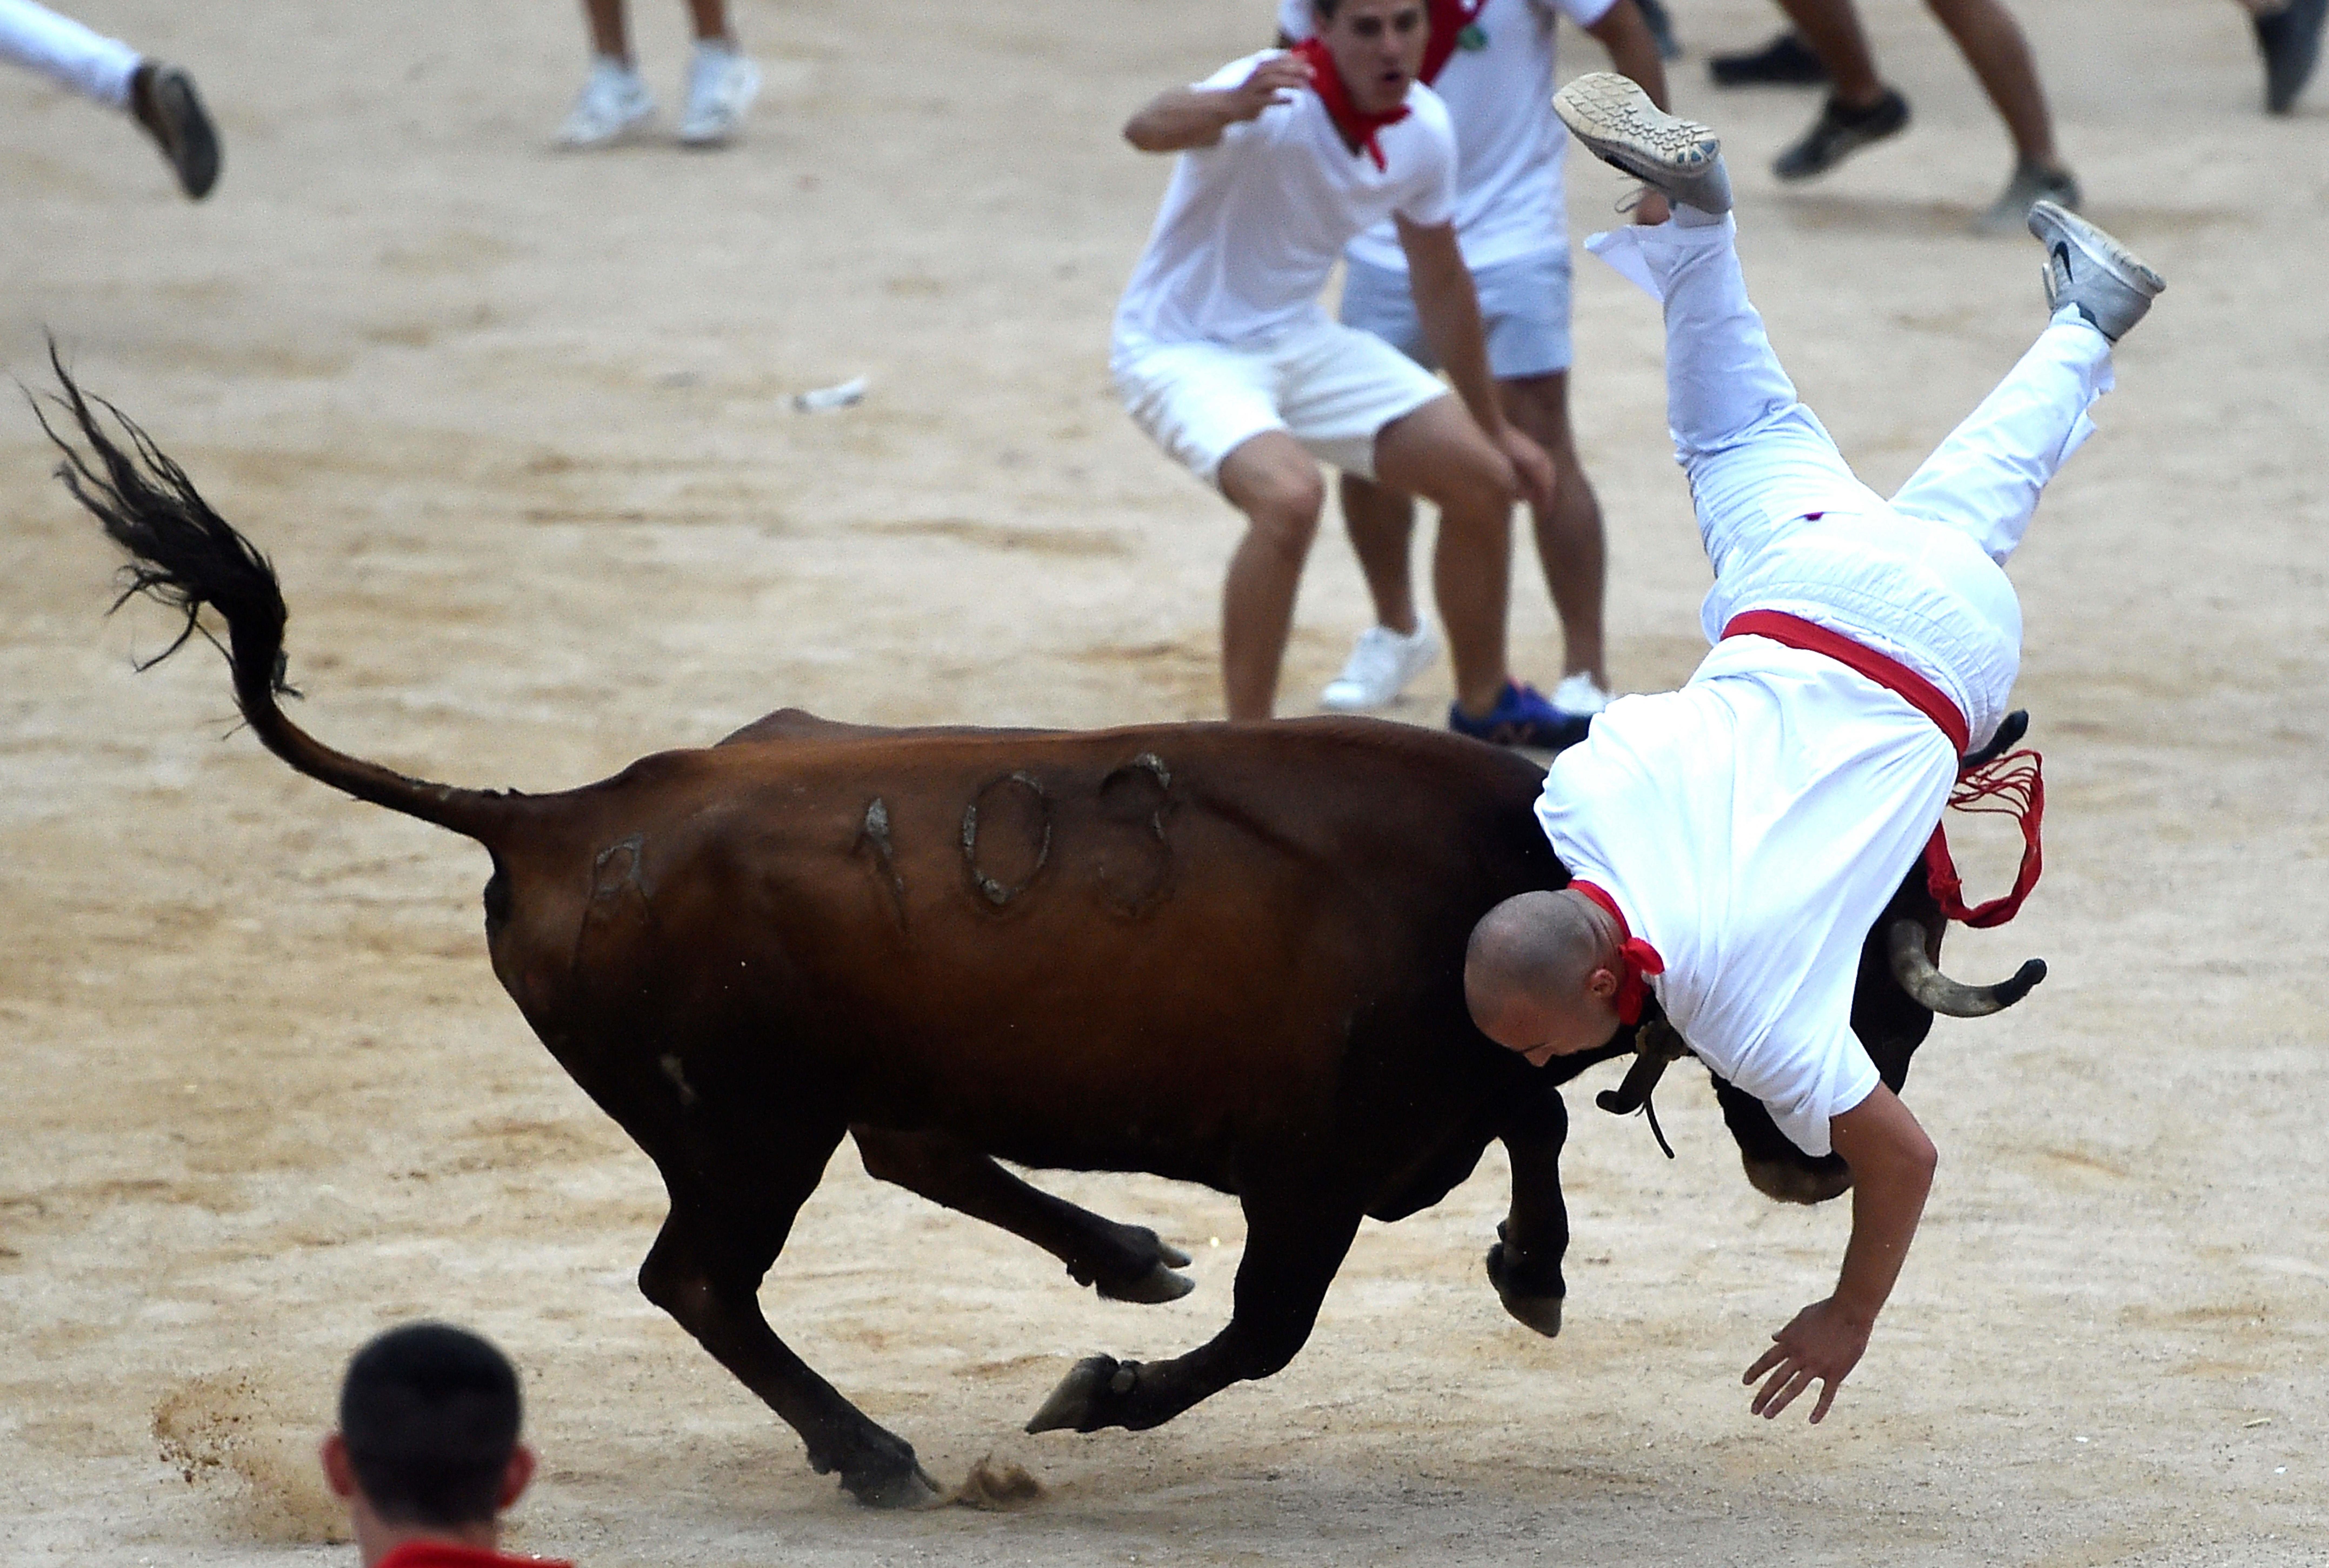 Frequently Asked Questions about Running of the Bulls